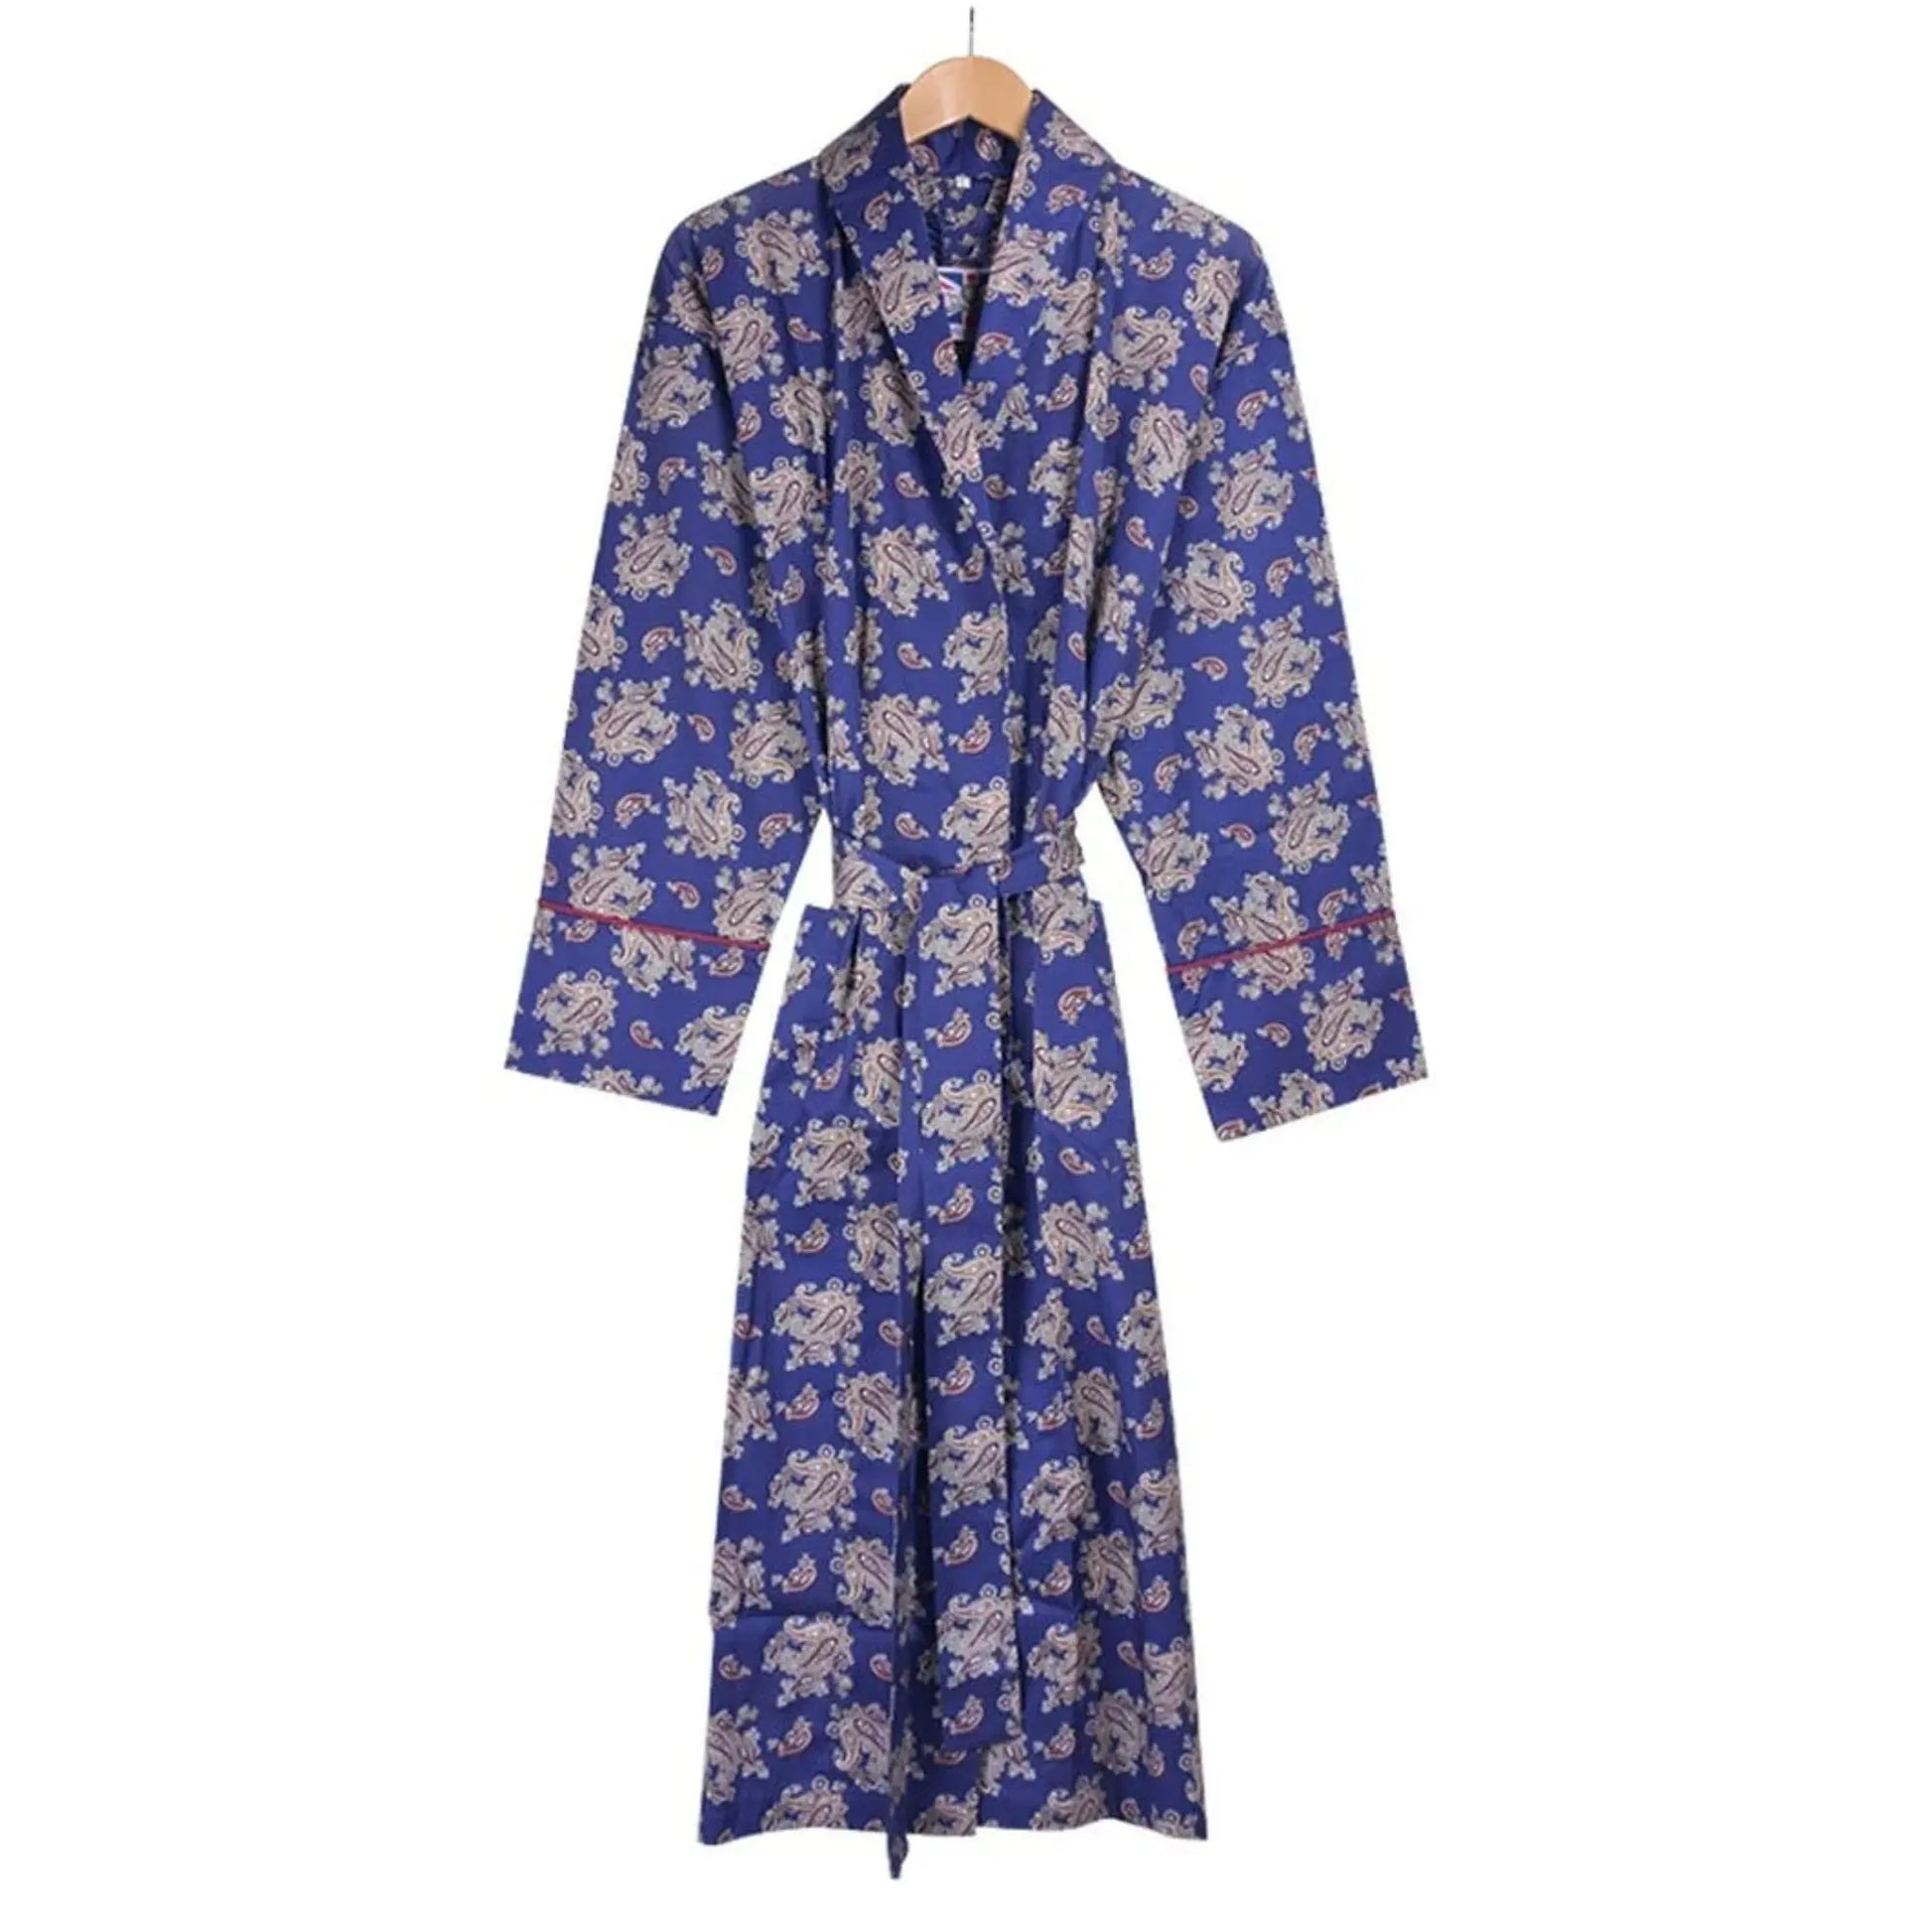 Buy Bown of London Gatsby Paisley Dressing Gown - Navy | Nightgownss at Woven Durham